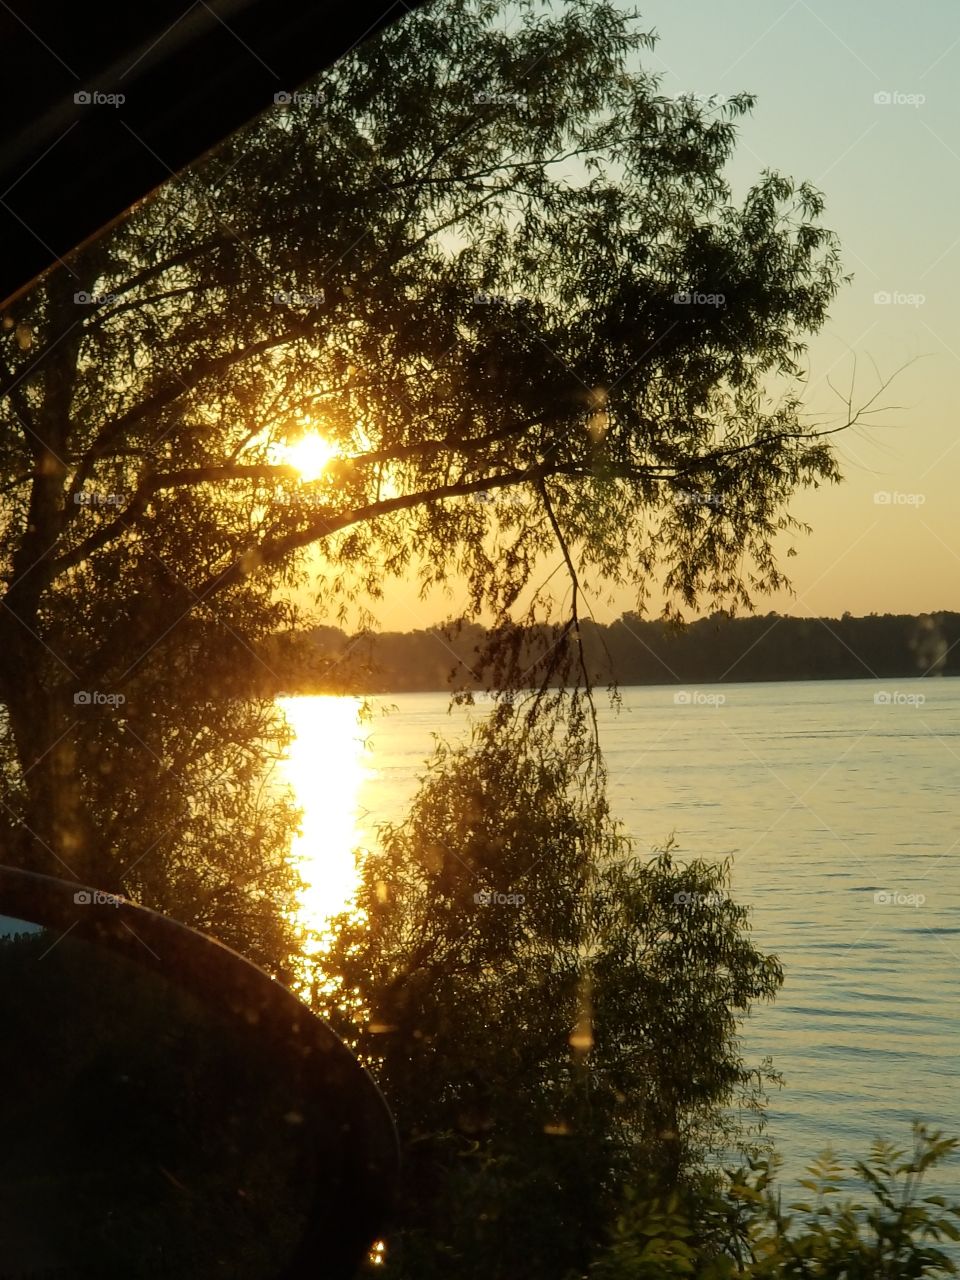 Sunset on "The Mighty Mississippi "